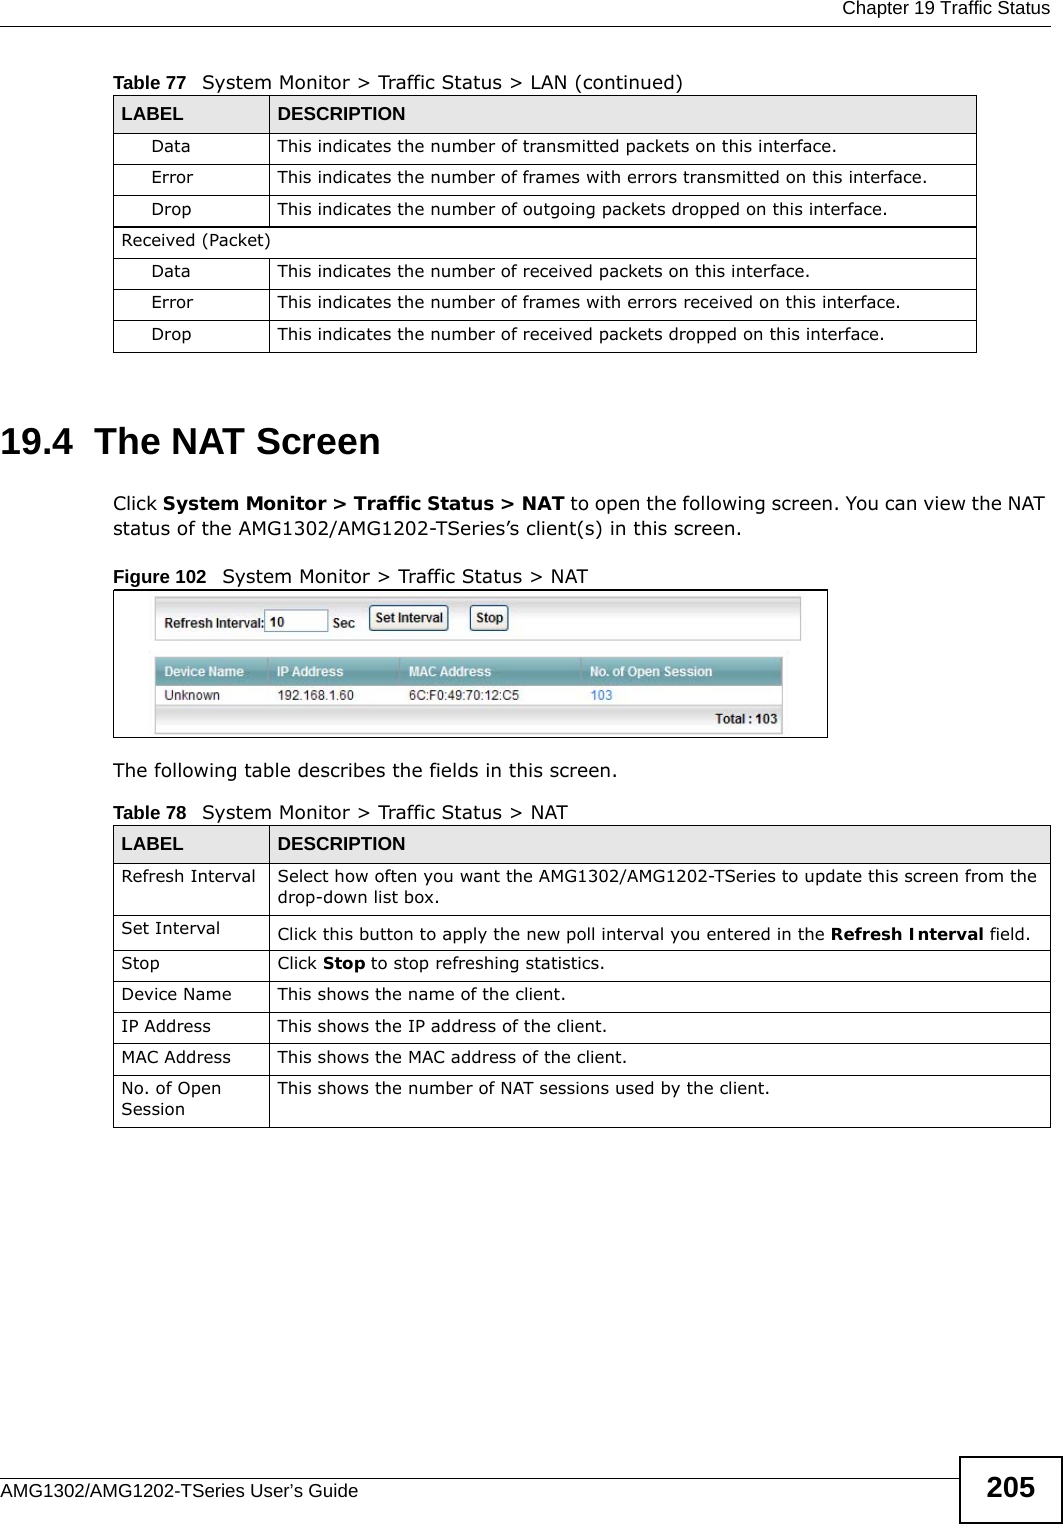  Chapter 19 Traffic StatusAMG1302/AMG1202-TSeries User’s Guide 20519.4  The NAT ScreenClick System Monitor &gt; Traffic Status &gt; NAT to open the following screen. You can view the NAT status of the AMG1302/AMG1202-TSeries’s client(s) in this screen.Figure 102   System Monitor &gt; Traffic Status &gt; NATThe following table describes the fields in this screen.Data  This indicates the number of transmitted packets on this interface.Error This indicates the number of frames with errors transmitted on this interface.Drop This indicates the number of outgoing packets dropped on this interface.Received (Packet) Data  This indicates the number of received packets on this interface.Error This indicates the number of frames with errors received on this interface.Drop This indicates the number of received packets dropped on this interface.Table 77   System Monitor &gt; Traffic Status &gt; LAN (continued)LABEL DESCRIPTIONTable 78   System Monitor &gt; Traffic Status &gt; NATLABEL DESCRIPTIONRefresh Interval Select how often you want the AMG1302/AMG1202-TSeries to update this screen from the drop-down list box.Set Interval Click this button to apply the new poll interval you entered in the Refresh Interval field.Stop Click Stop to stop refreshing statistics.Device Name This shows the name of the client.IP Address This shows the IP address of the client.MAC Address This shows the MAC address of the client.No. of Open SessionThis shows the number of NAT sessions used by the client.